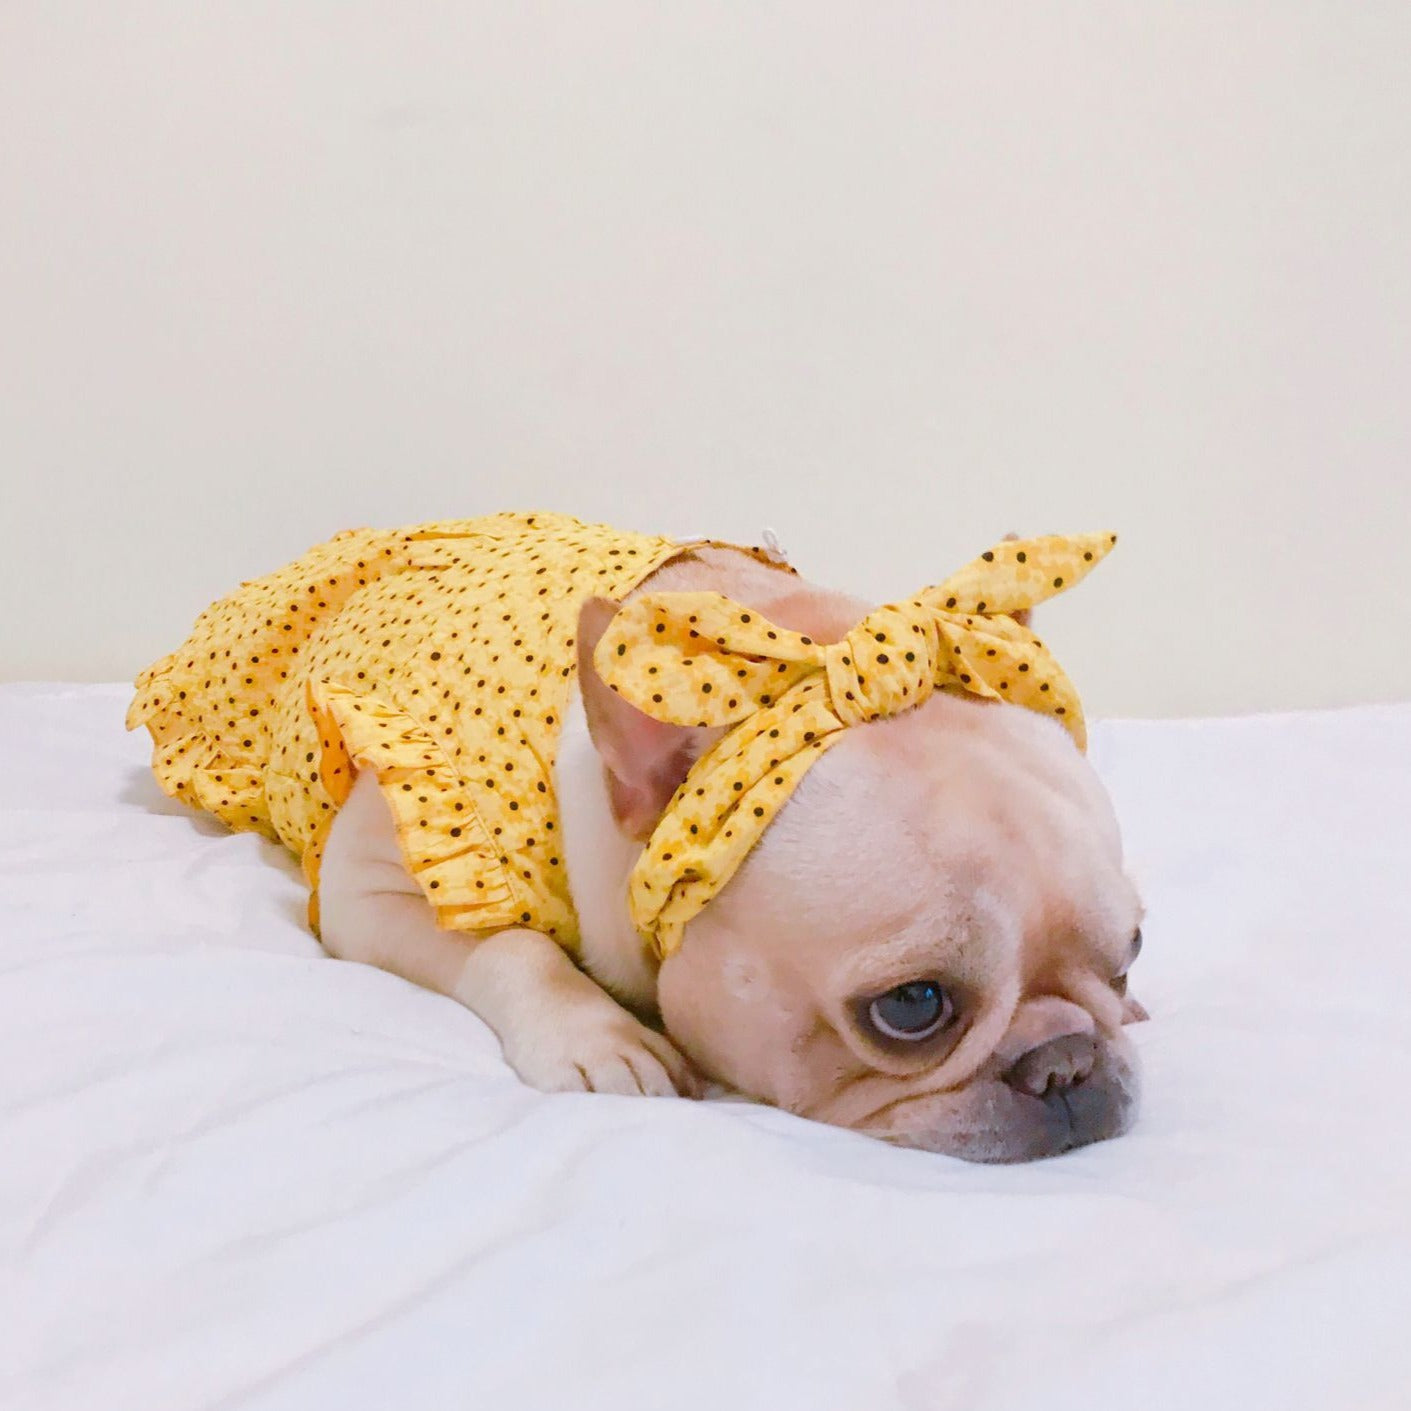 Dog Floral Puff Sleeve Dress - Frenchiely